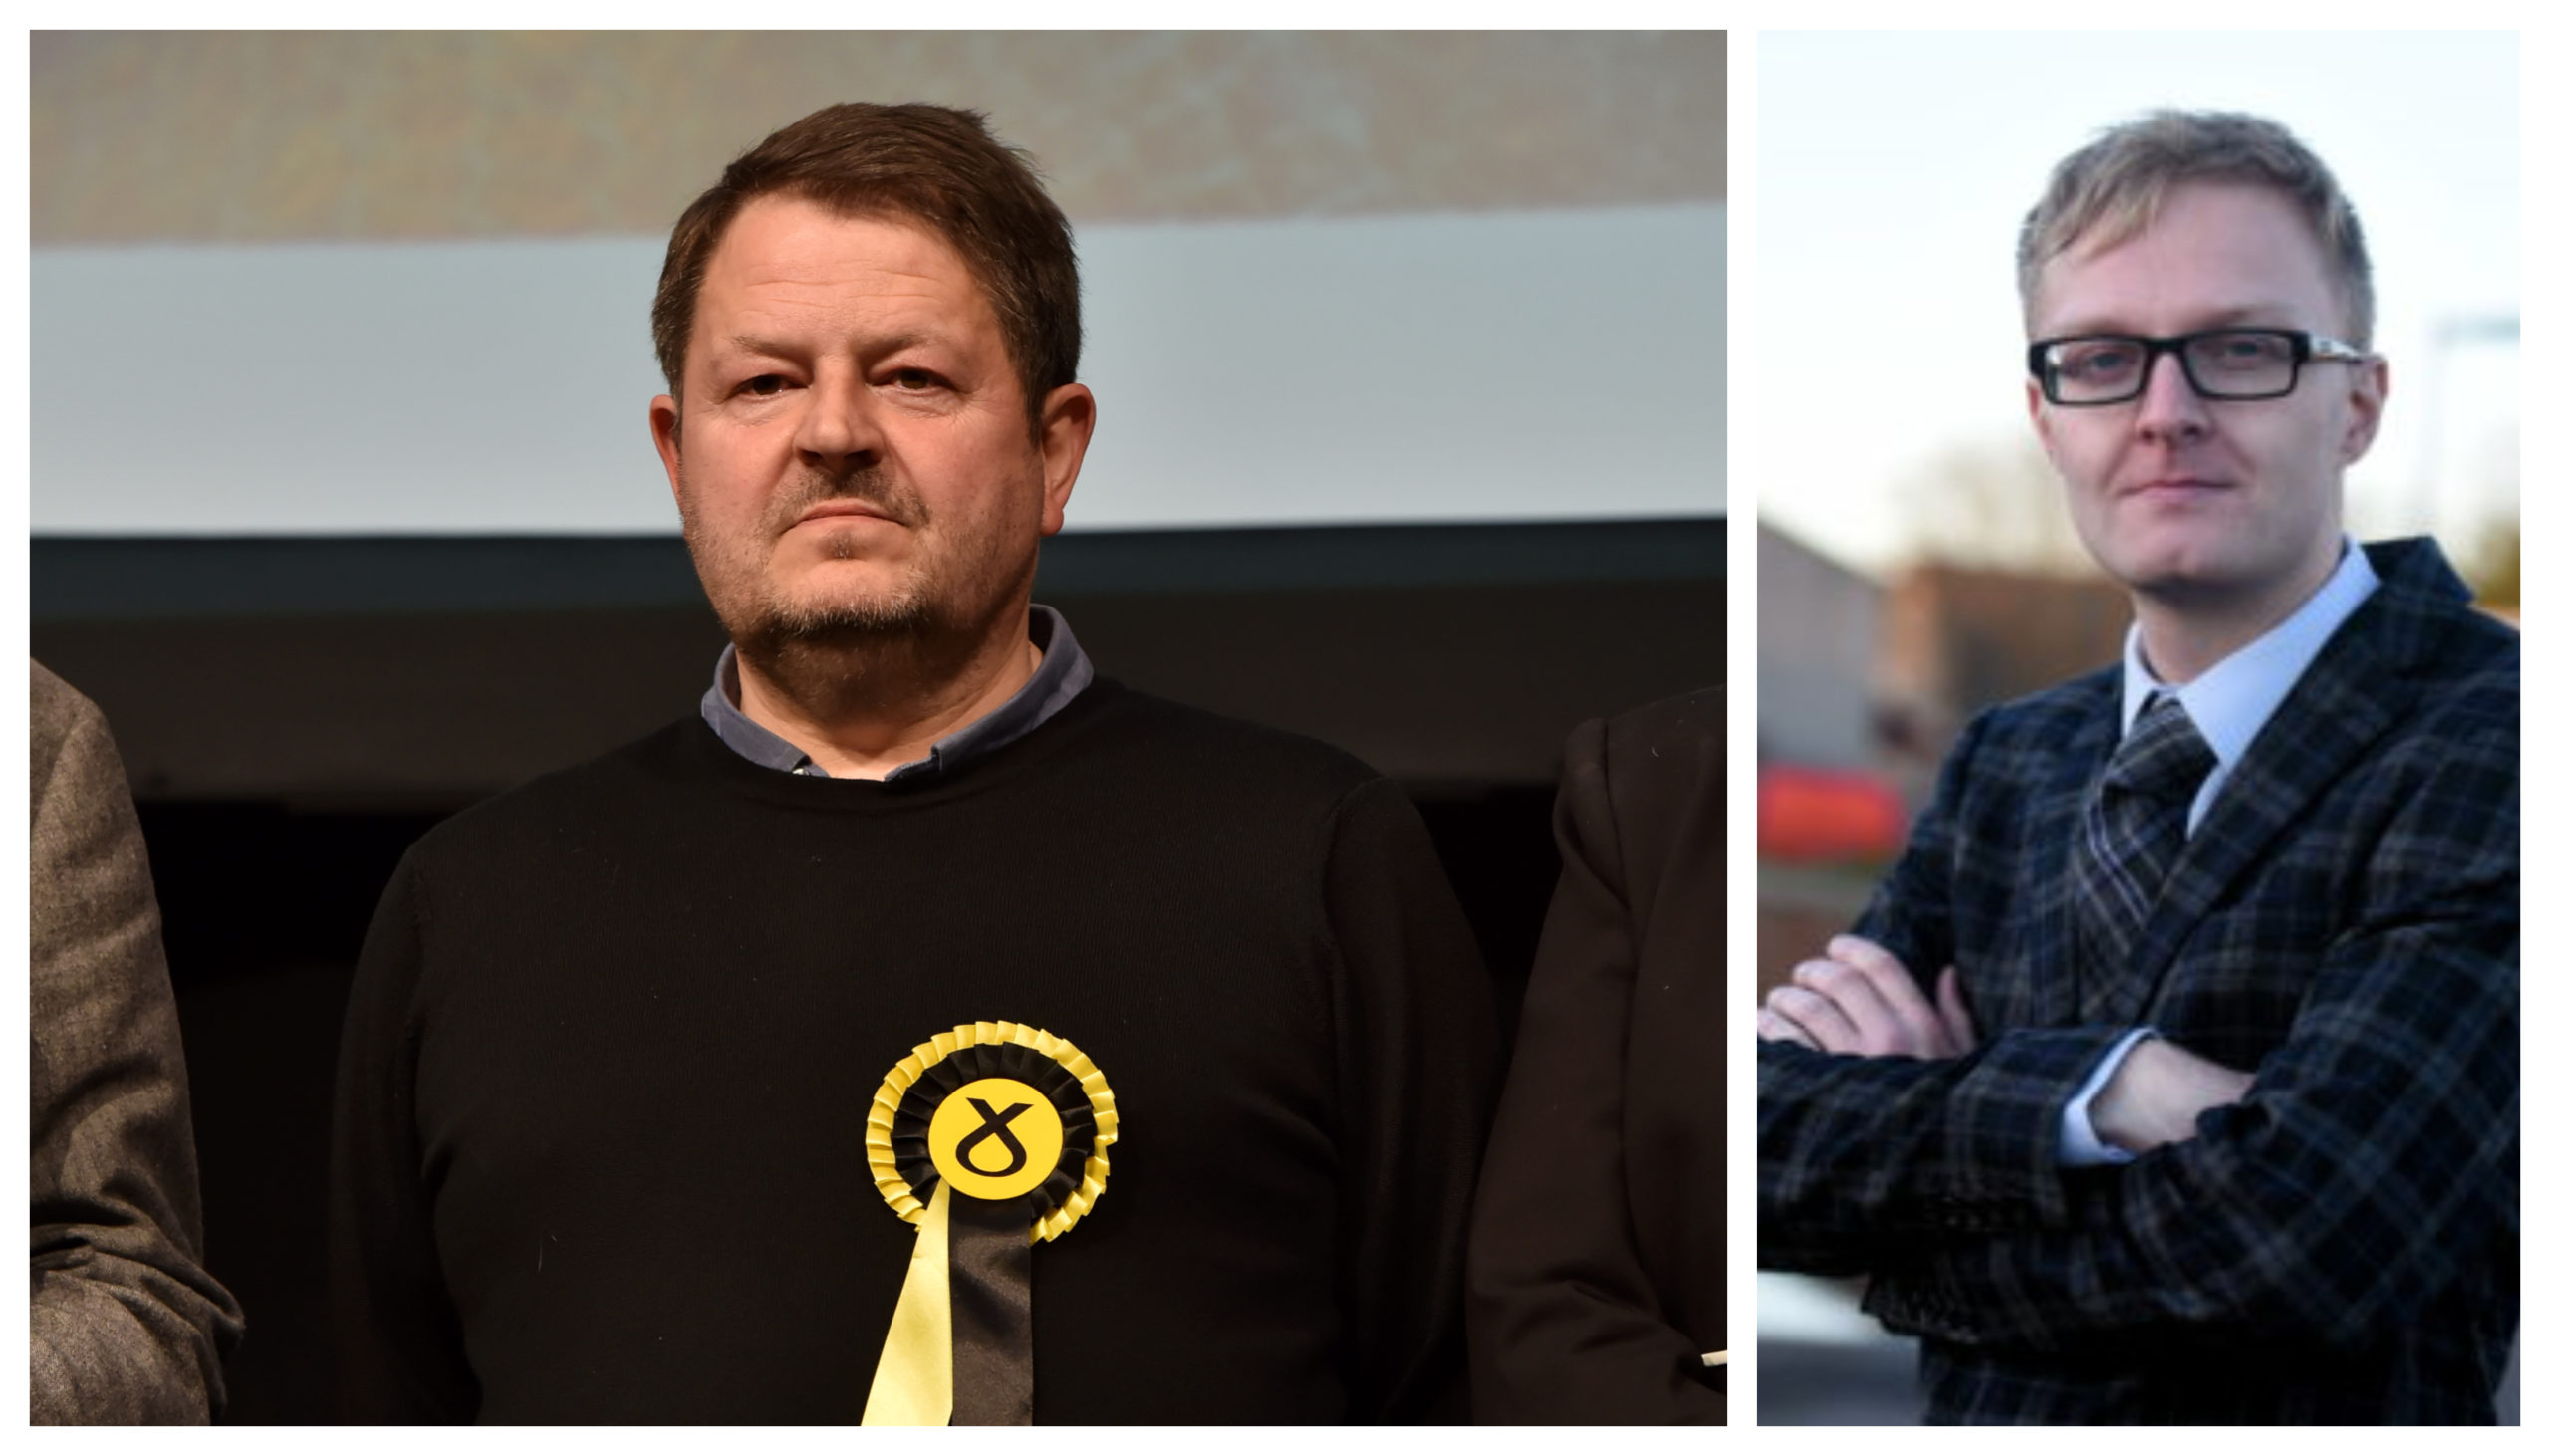 Alastair Bews, left, quit the SNP group soon after fellow Aberdeenshire Councillor Leigh Wilson, right, did the same. Both are continuing as independents.